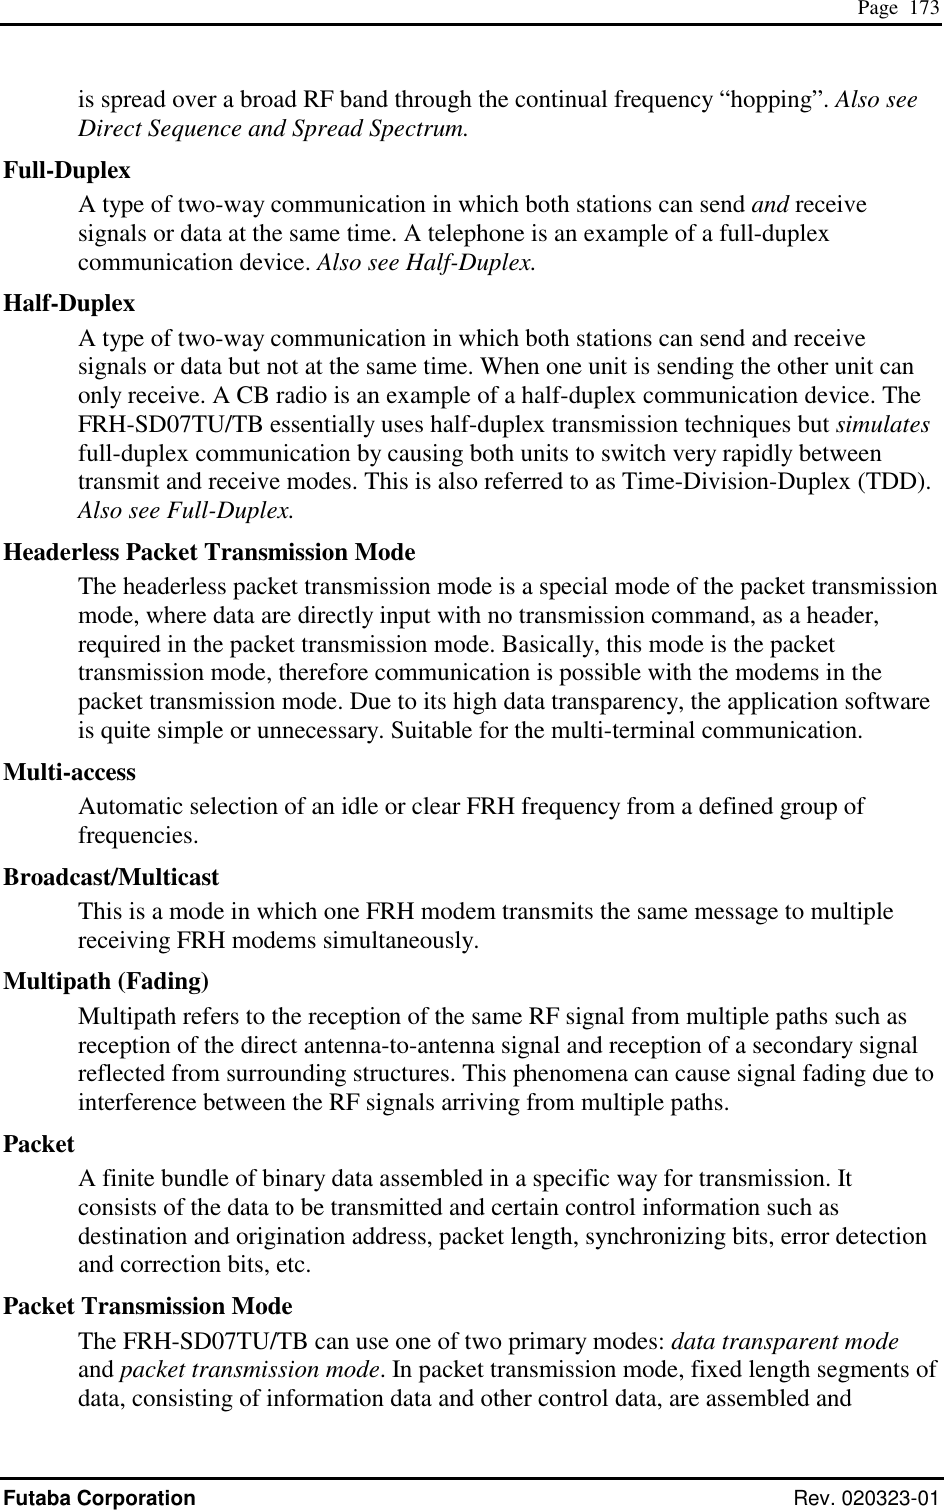  Page  173 Futaba Corporation Rev. 020323-01 is spread over a broad RF band through the continual frequency “hopping”. Also see Direct Sequence and Spread Spectrum. Full-Duplex A type of two-way communication in which both stations can send and receive signals or data at the same time. A telephone is an example of a full-duplex communication device. Also see Half-Duplex. Half-Duplex A type of two-way communication in which both stations can send and receive signals or data but not at the same time. When one unit is sending the other unit can only receive. A CB radio is an example of a half-duplex communication device. The FRH-SD07TU/TB essentially uses half-duplex transmission techniques but simulates full-duplex communication by causing both units to switch very rapidly between transmit and receive modes. This is also referred to as Time-Division-Duplex (TDD). Also see Full-Duplex. Headerless Packet Transmission Mode The headerless packet transmission mode is a special mode of the packet transmission mode, where data are directly input with no transmission command, as a header, required in the packet transmission mode. Basically, this mode is the packet transmission mode, therefore communication is possible with the modems in the packet transmission mode. Due to its high data transparency, the application software is quite simple or unnecessary. Suitable for the multi-terminal communication. Multi-access Automatic selection of an idle or clear FRH frequency from a defined group of frequencies. Broadcast/Multicast This is a mode in which one FRH modem transmits the same message to multiple receiving FRH modems simultaneously. Multipath (Fading) Multipath refers to the reception of the same RF signal from multiple paths such as reception of the direct antenna-to-antenna signal and reception of a secondary signal reflected from surrounding structures. This phenomena can cause signal fading due to interference between the RF signals arriving from multiple paths. Packet A finite bundle of binary data assembled in a specific way for transmission. It consists of the data to be transmitted and certain control information such as destination and origination address, packet length, synchronizing bits, error detection and correction bits, etc. Packet Transmission Mode The FRH-SD07TU/TB can use one of two primary modes: data transparent mode and packet transmission mode. In packet transmission mode, fixed length segments of data, consisting of information data and other control data, are assembled and 